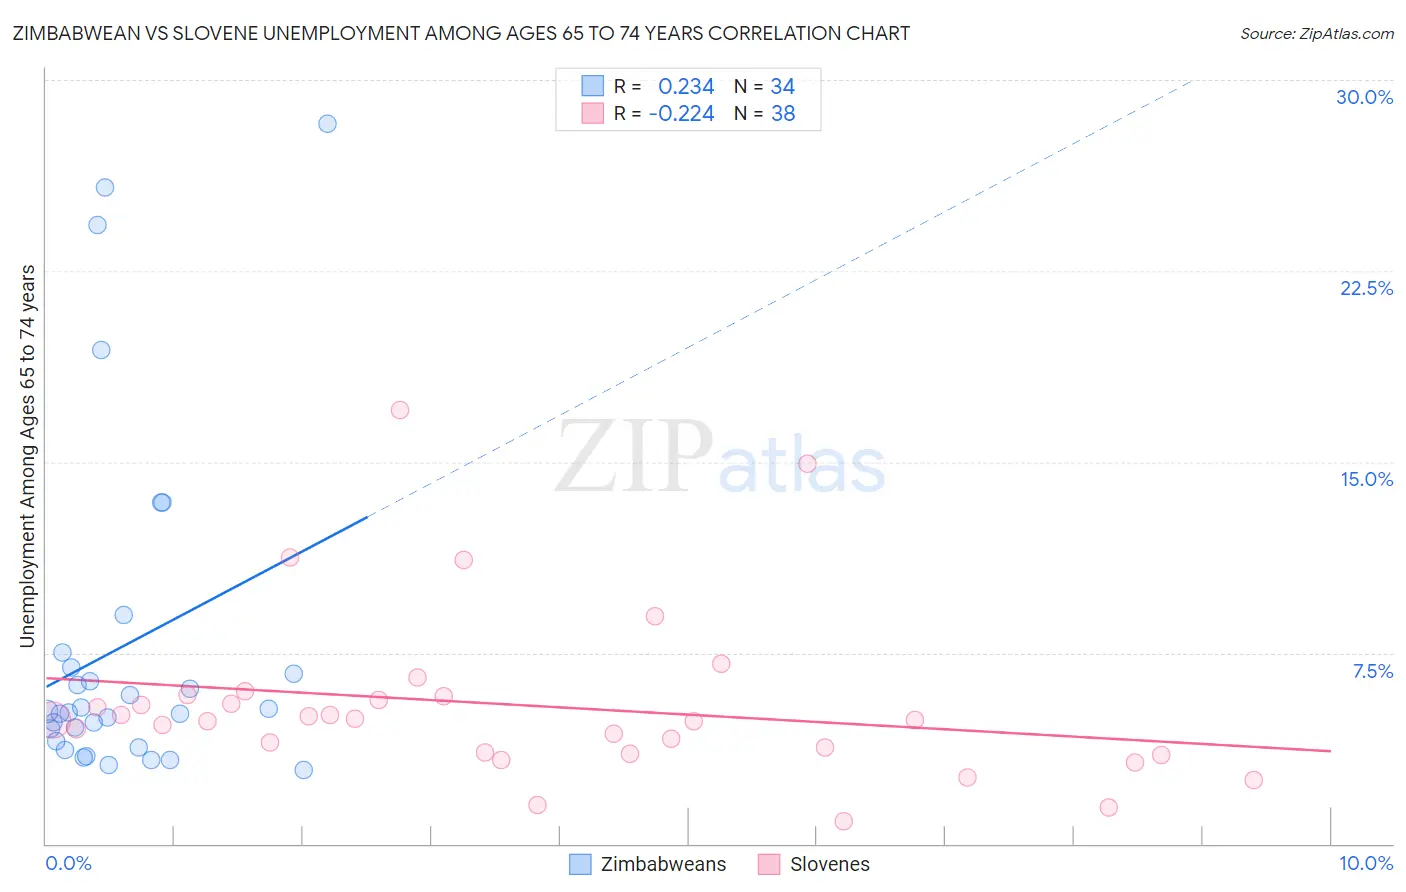 Zimbabwean vs Slovene Unemployment Among Ages 65 to 74 years